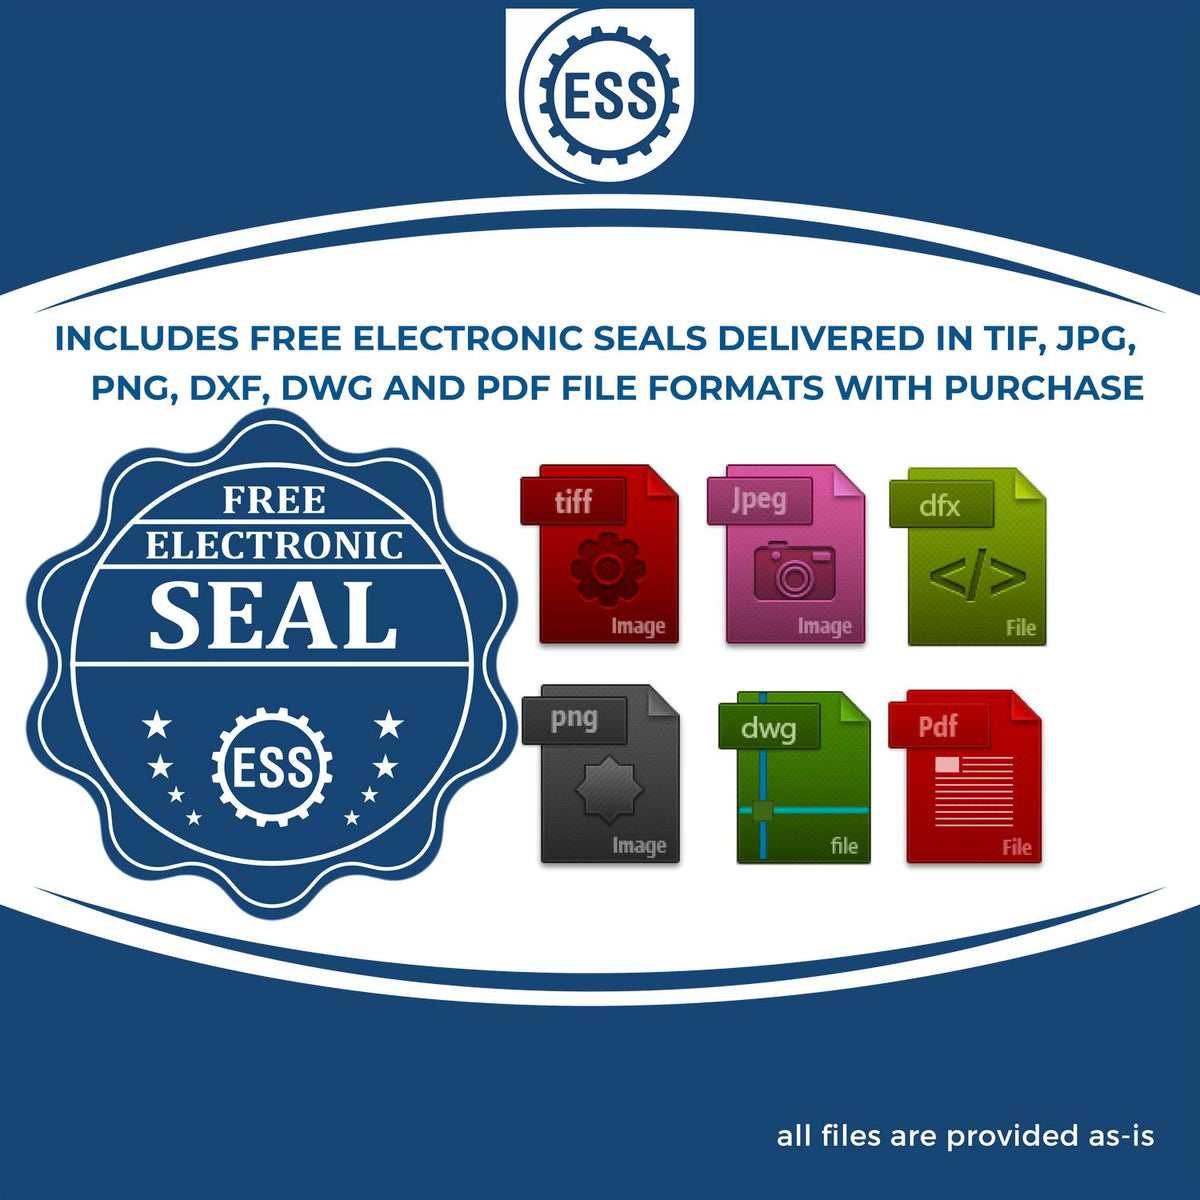 An infographic for the free electronic seal for the Gift Utah Engineer Seal illustrating the different file type icons such as DXF, DWG, TIF, JPG and PNG.